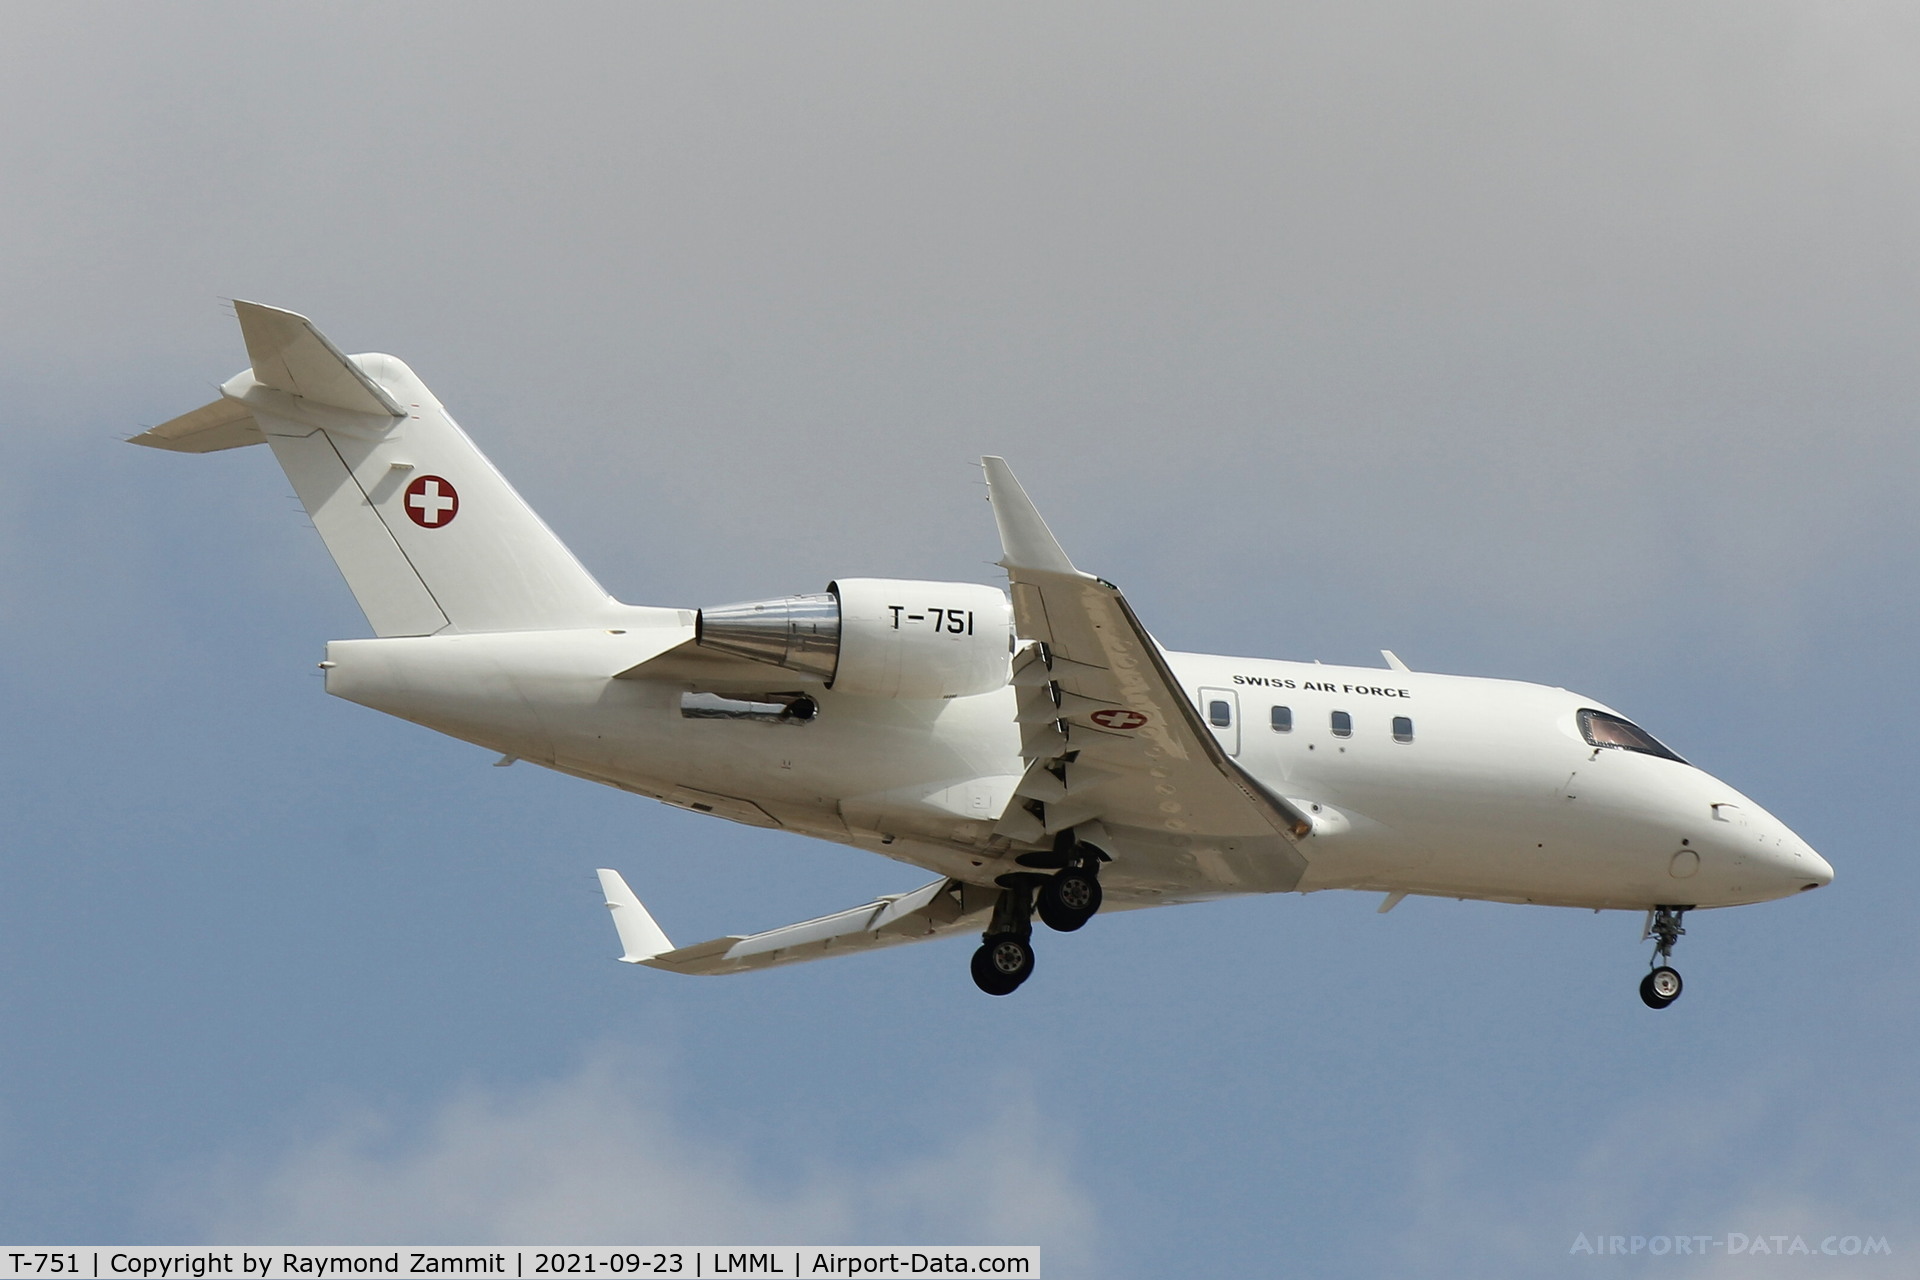 T-751, 2002 Bombardier Challenger 604 (CL-600-2B16) C/N 5530, Bombardier Challenger 604 T-751 Swiss Air Force